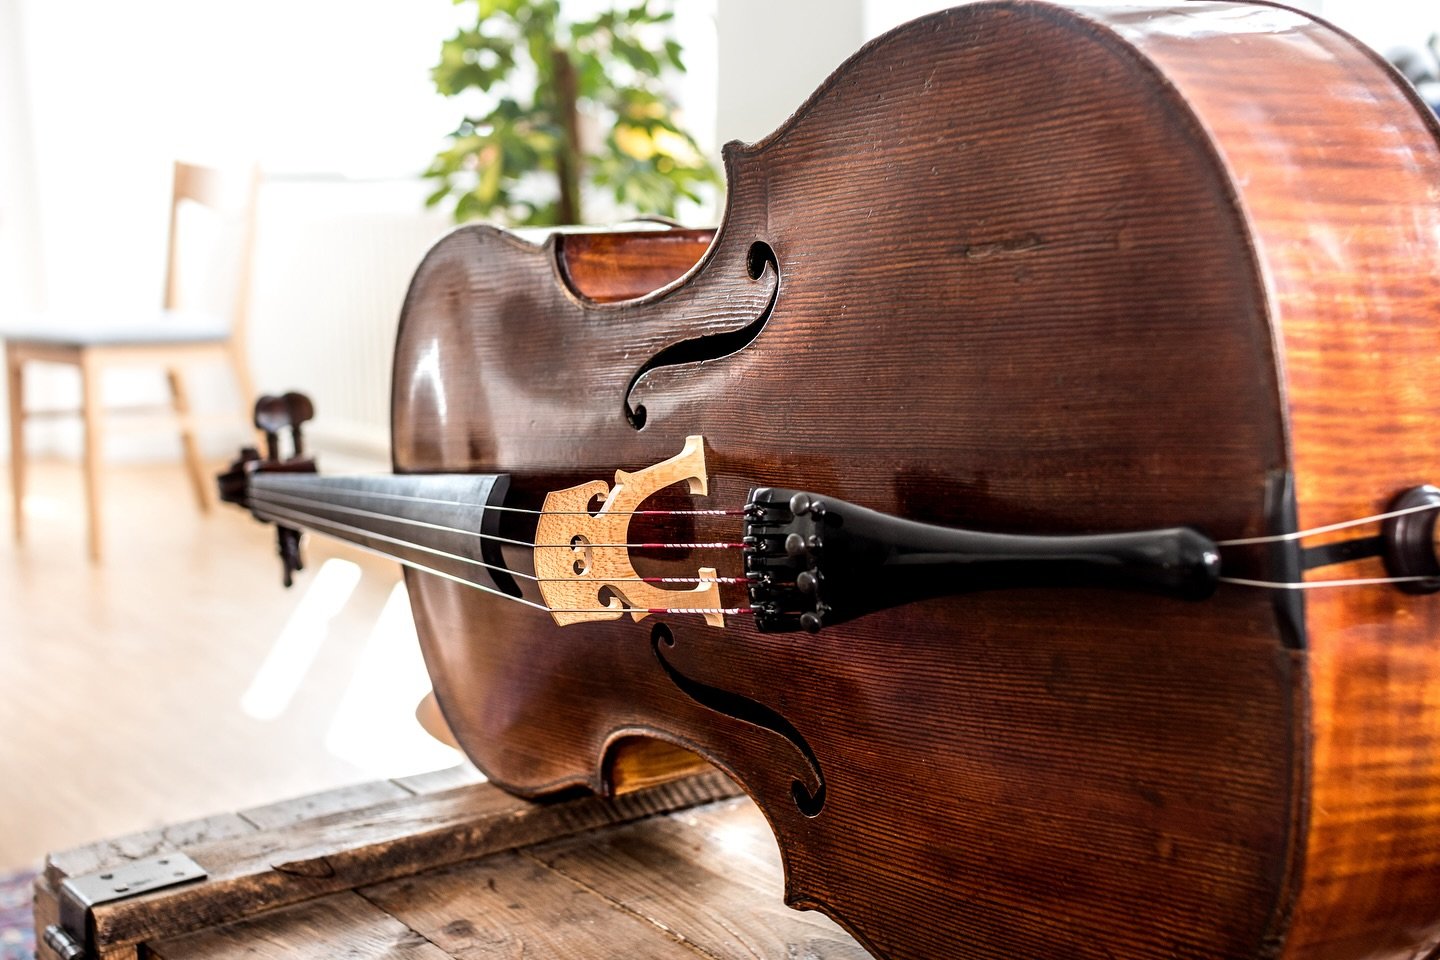 1850 and from the environment of Martin Stoss and for sale. Check my recordings to hear its beautiful soul.
.
.
.
.
.
.
#cello #cellos #cellist #music #classical #classicalmusic #musician #chambermusic #klassik #lutherie #geigenbau #violinmaker #hist